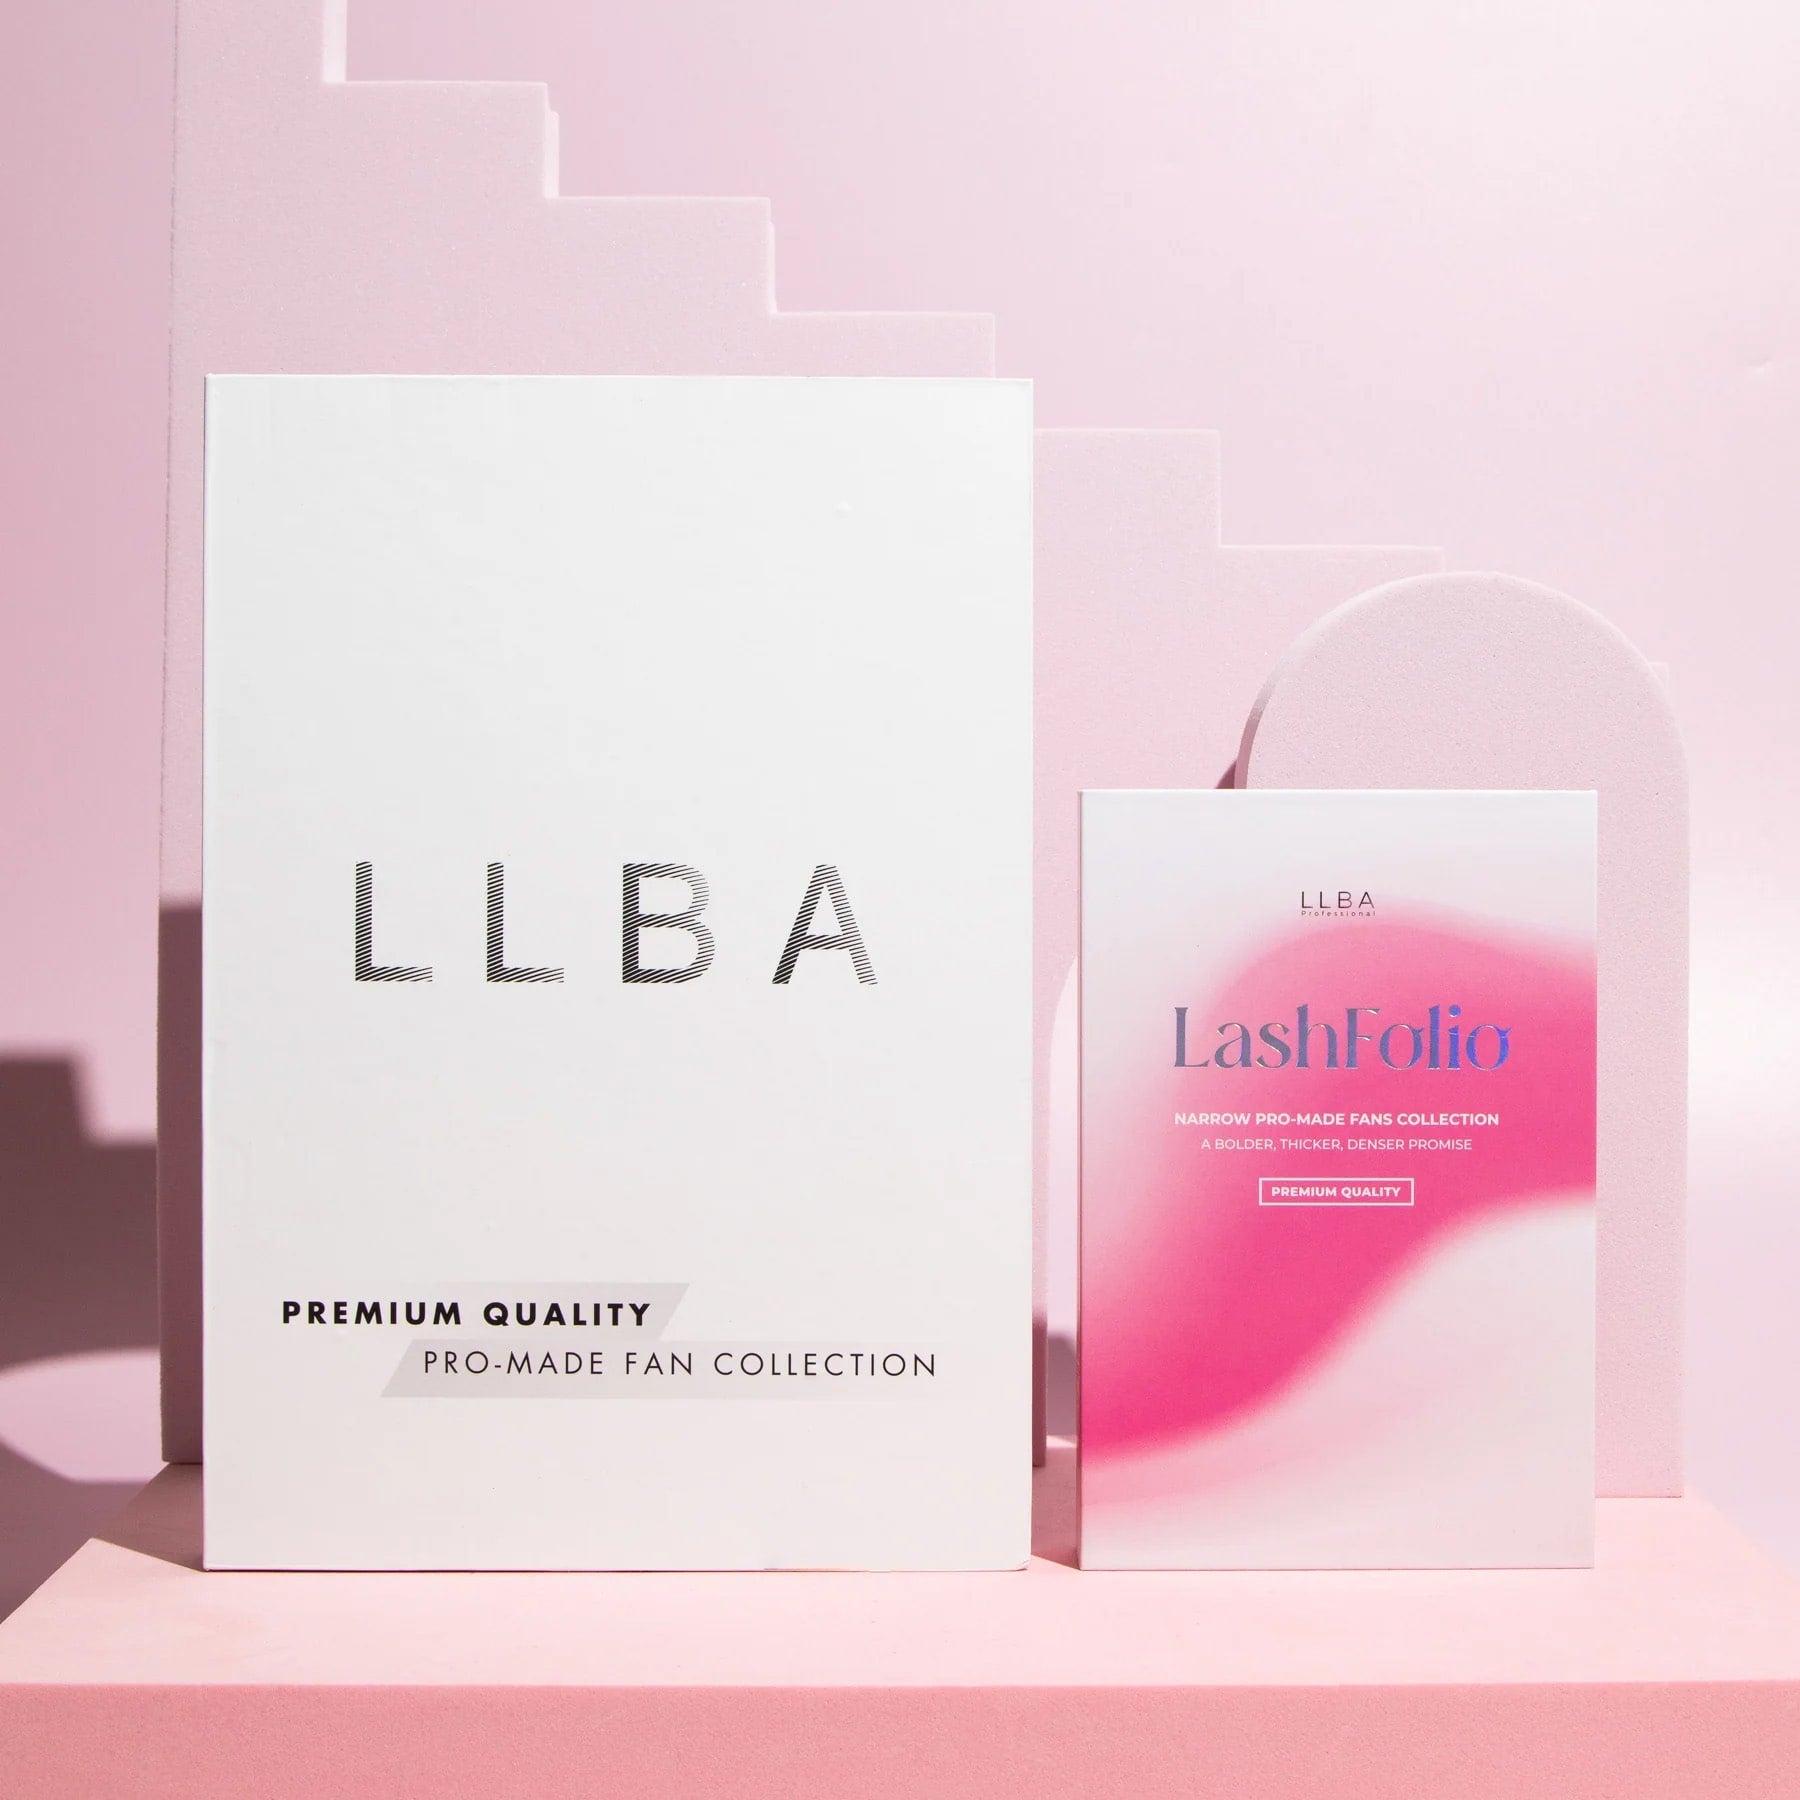 Healthy Mega Volume Lashes Are Possible – with LLBA!